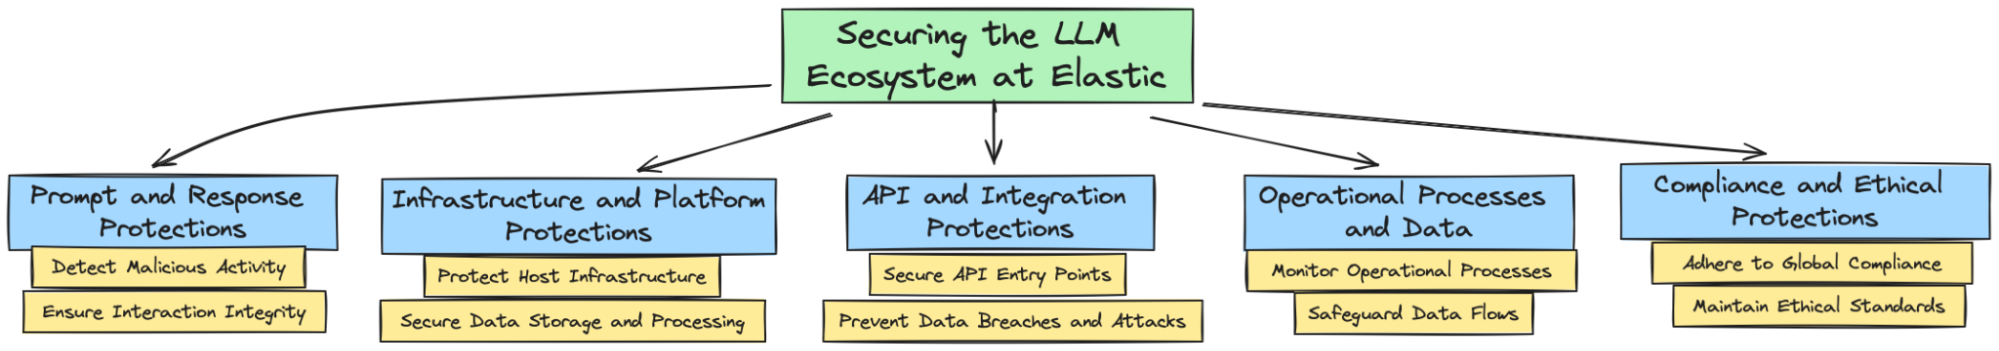 Securing the LLM Ecosystem: five categories